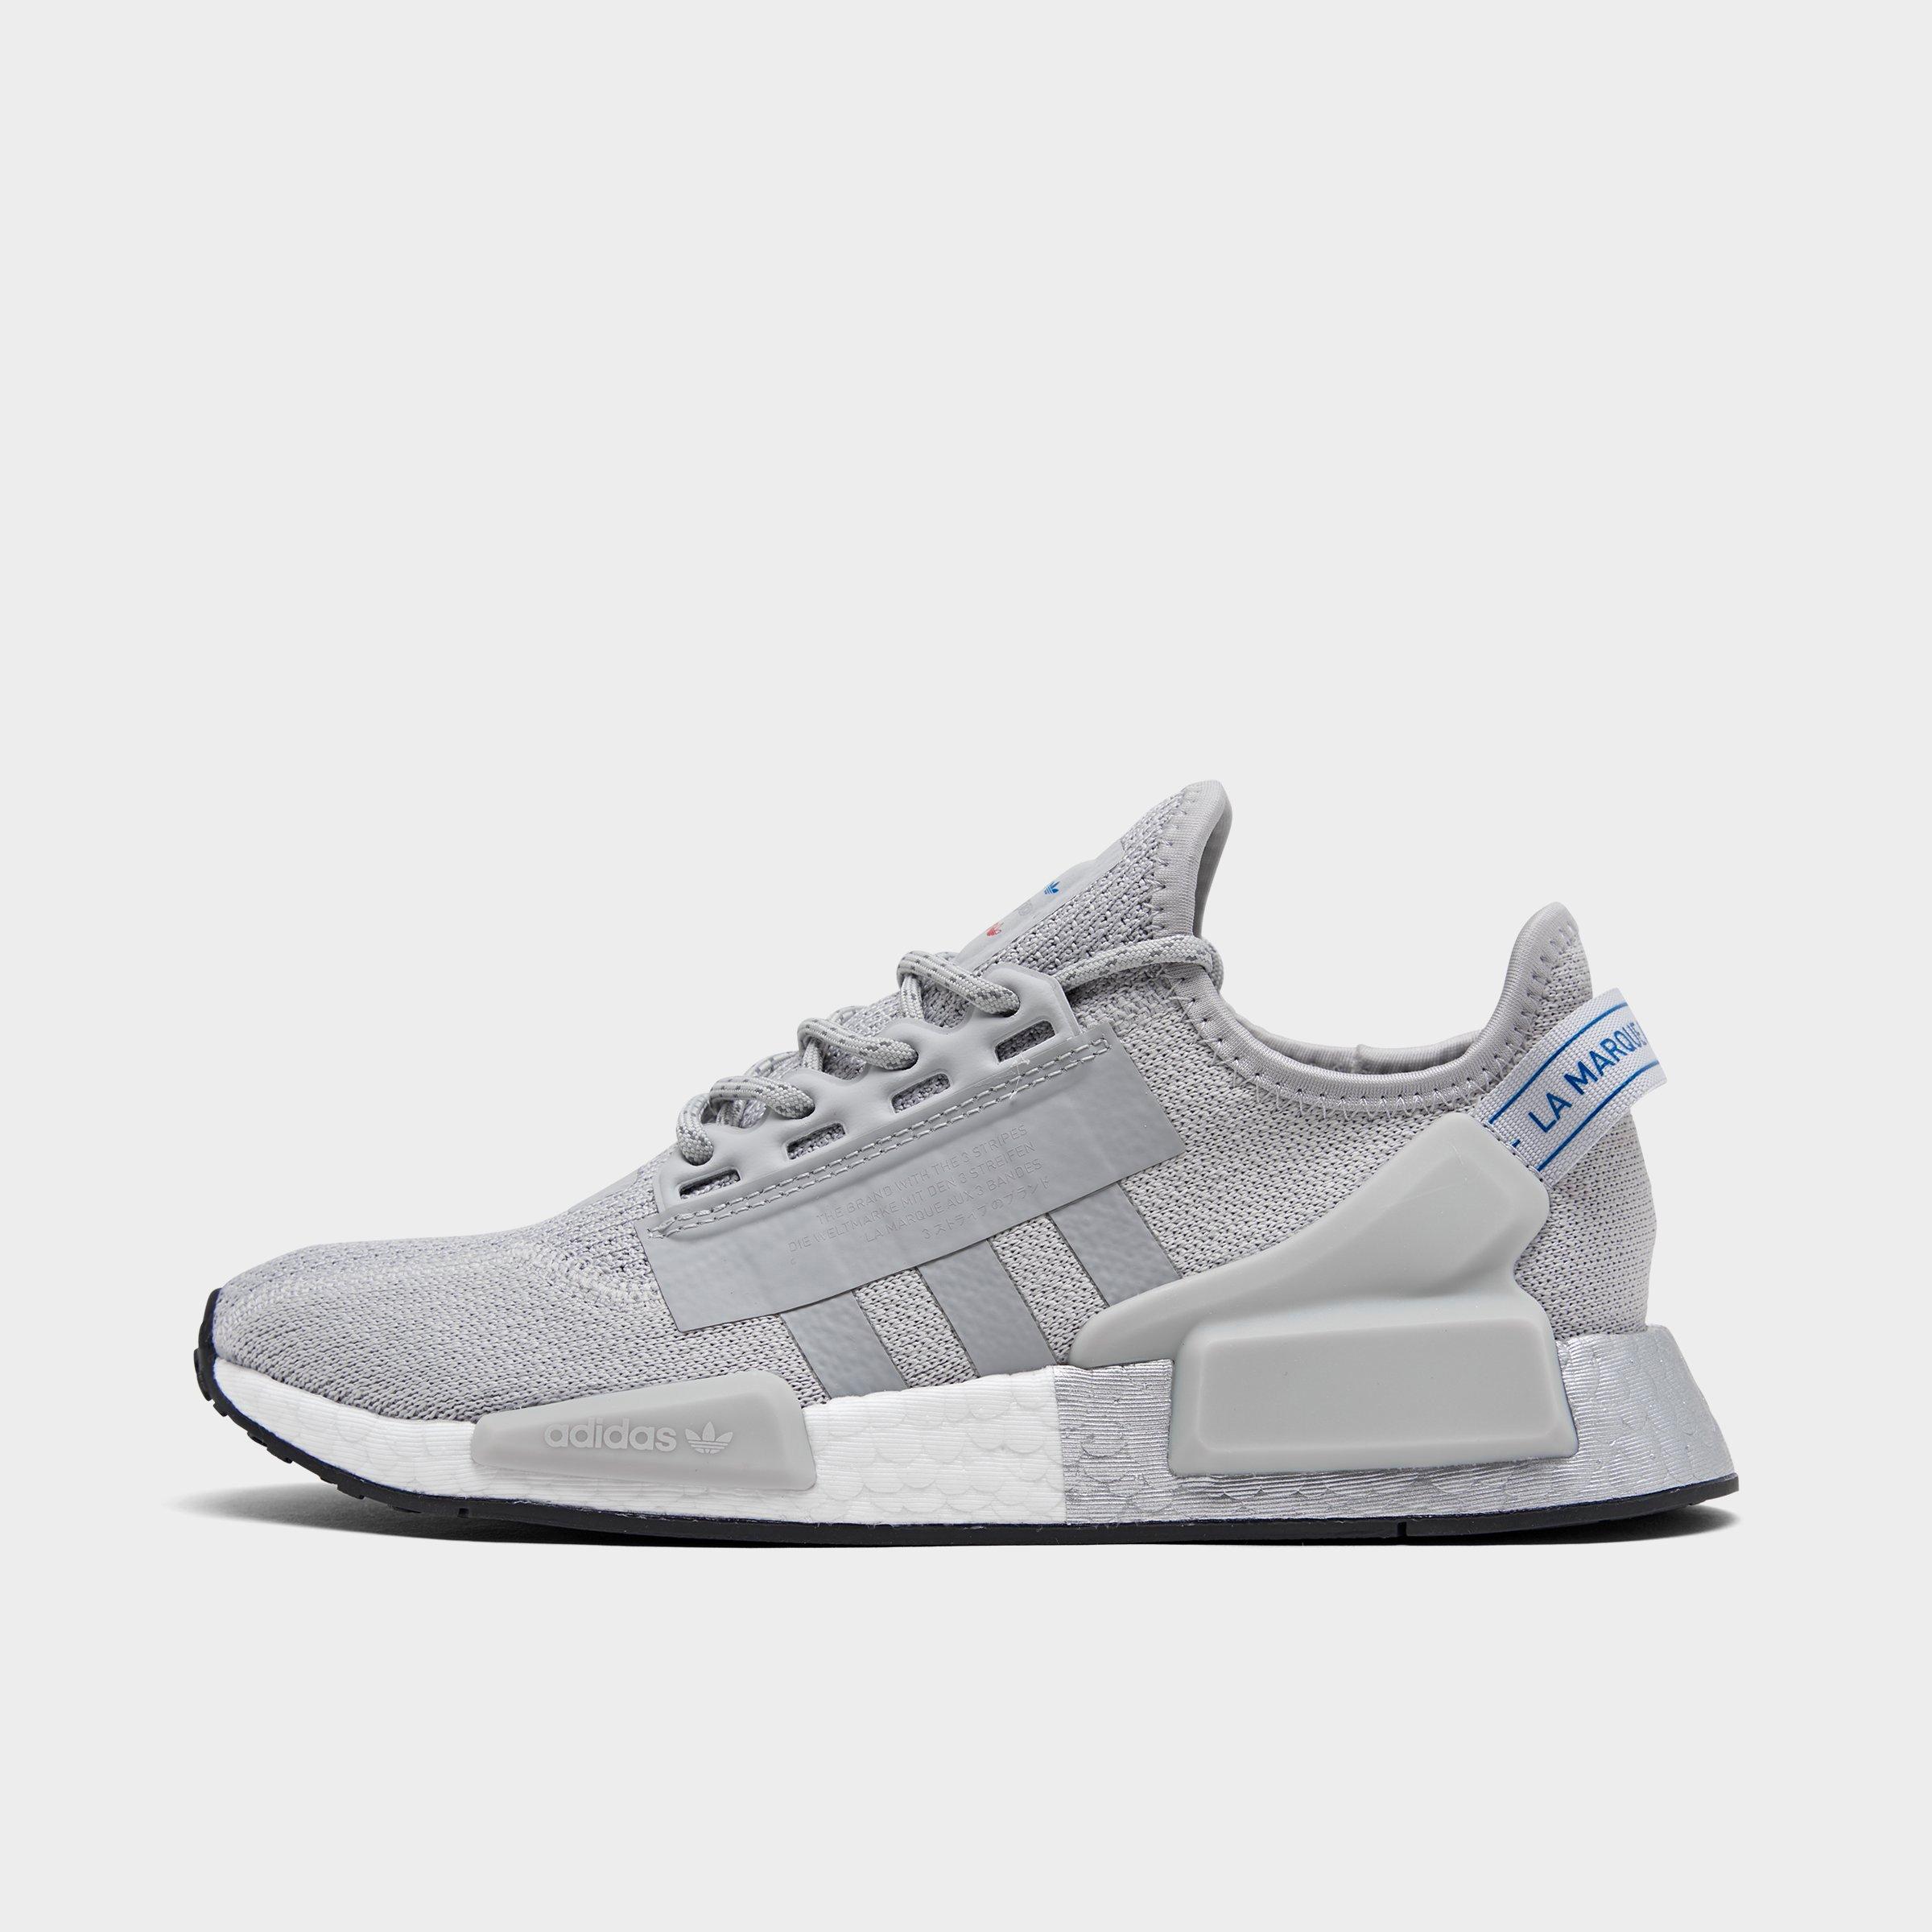 Adidas Originals NMD R1 EE5086 White 46 Outlet JDid